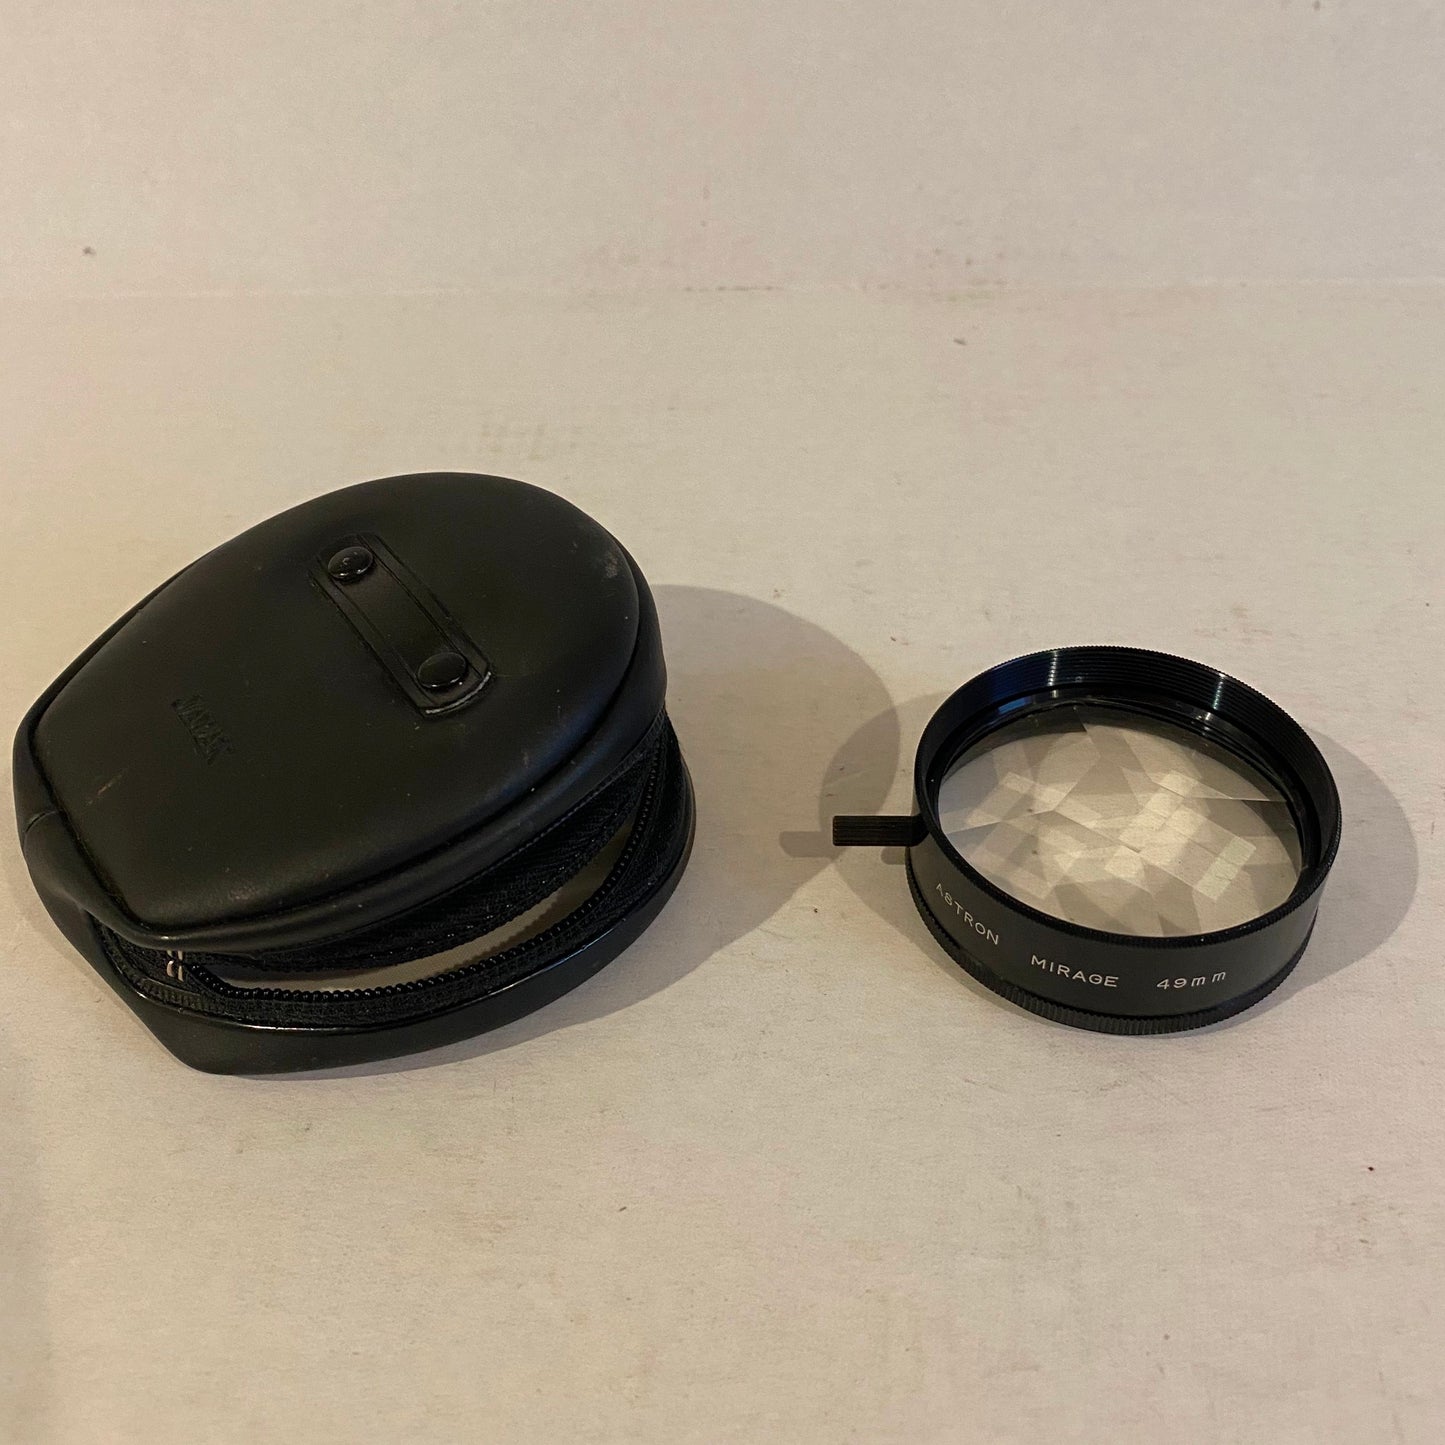 Astron Mirage 49mm Screw in Effects Lens Filter with Case